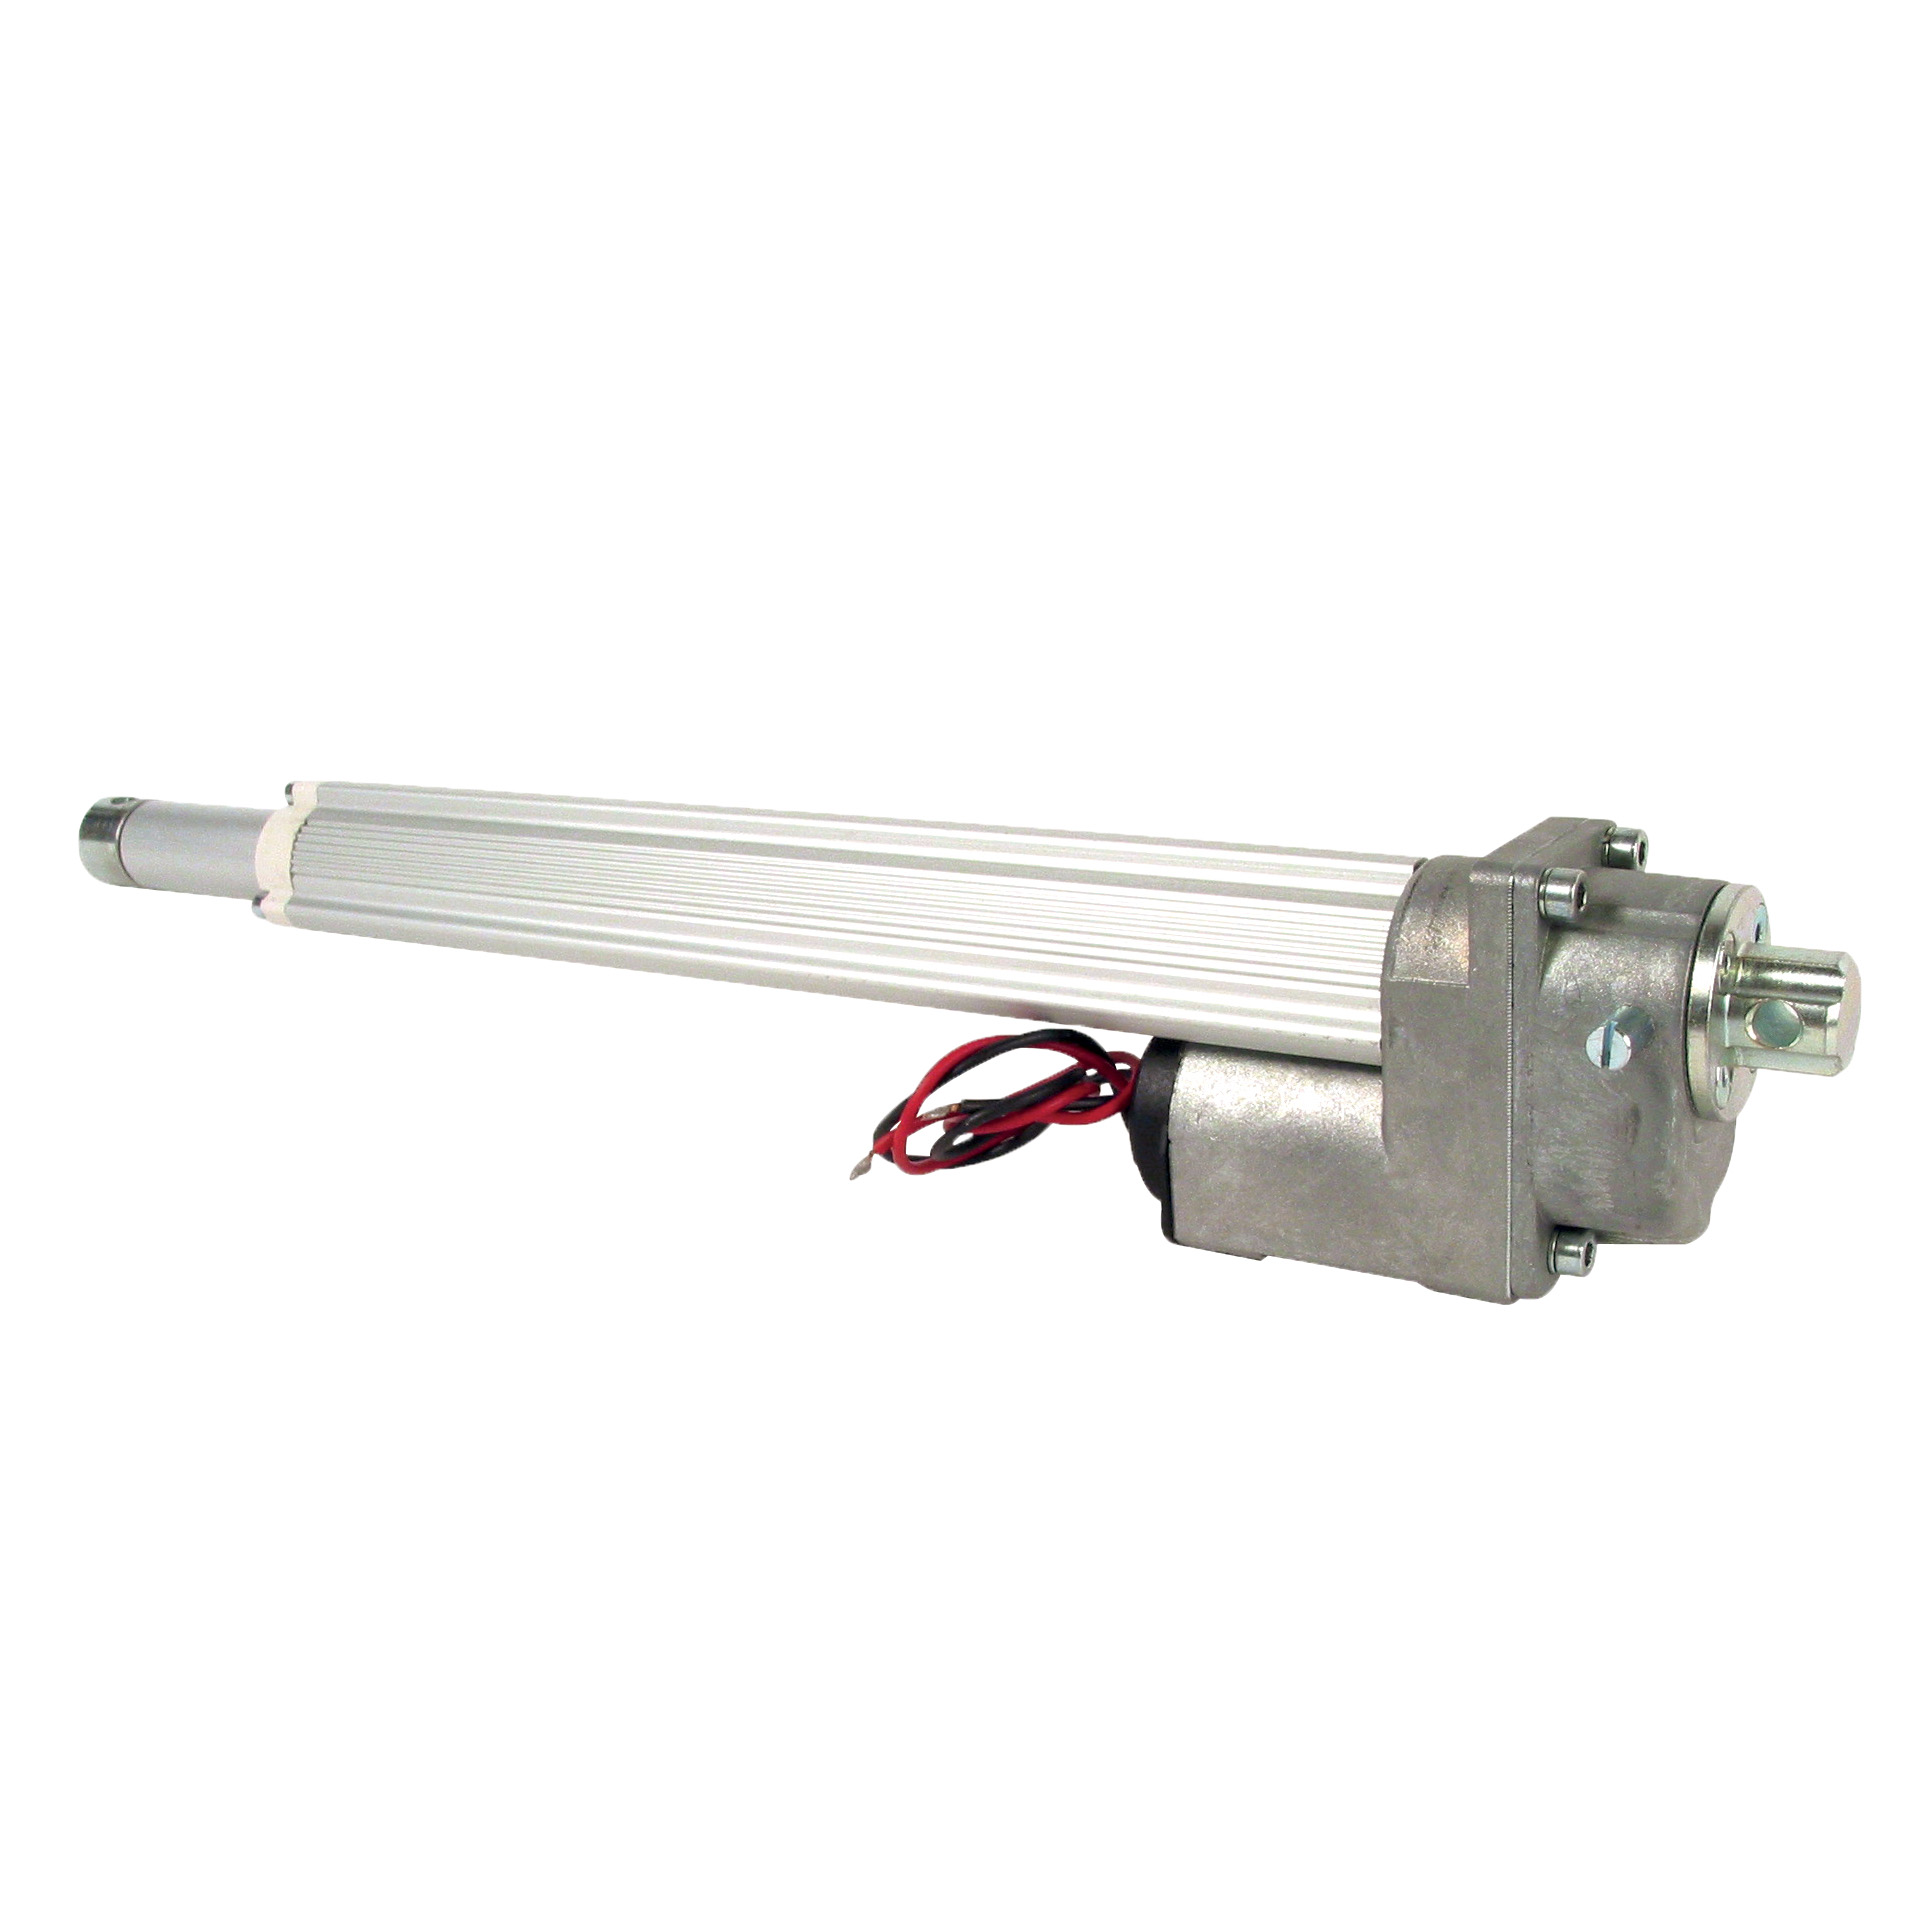 Miniature motorised actuator 1A - 1 amper - 10mm - With